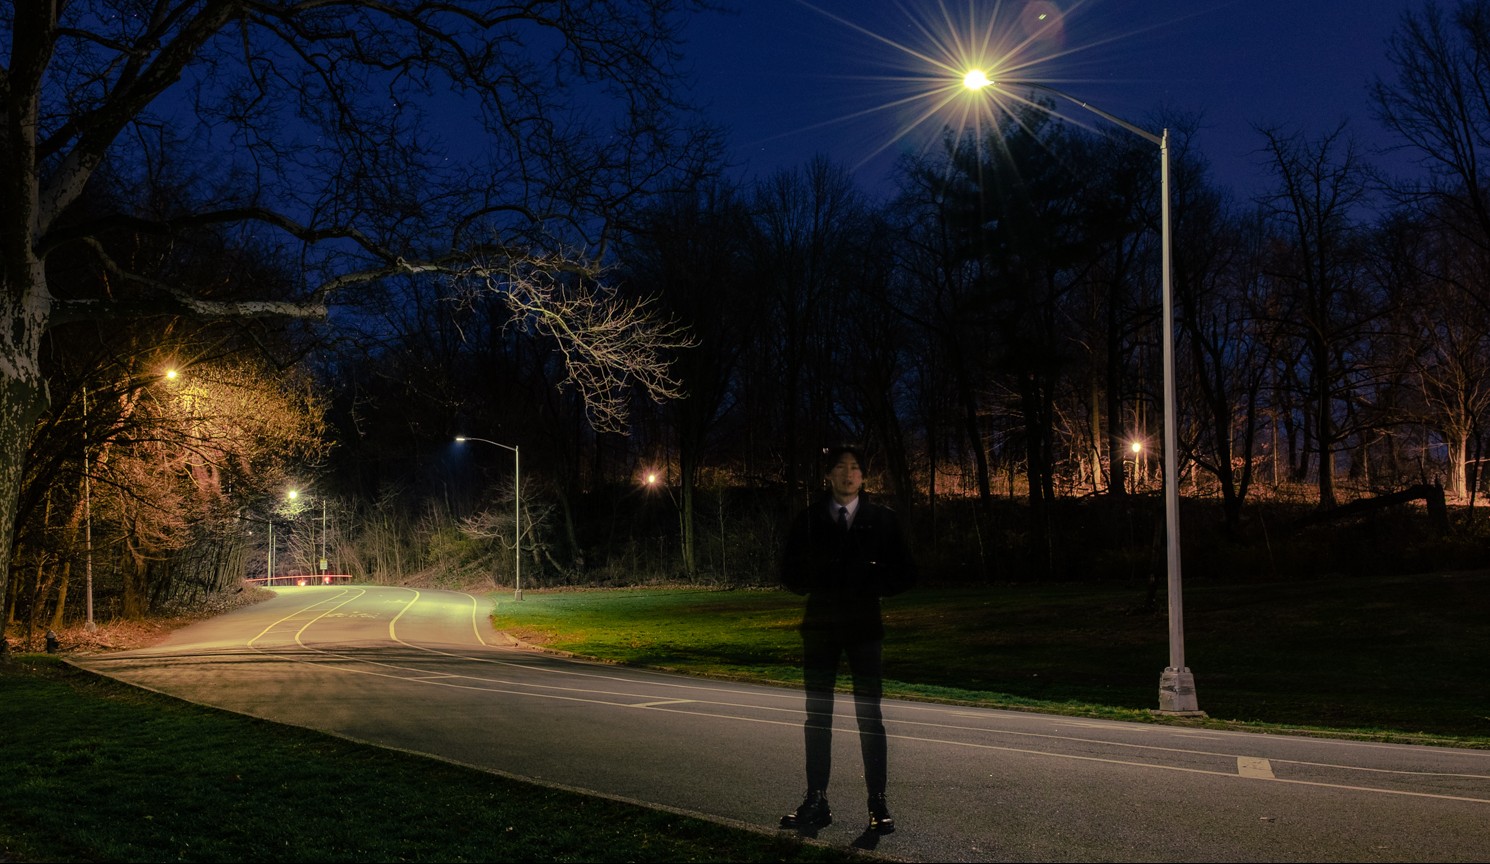 A male-presenting figure stands on a road at night surrounded by trees.